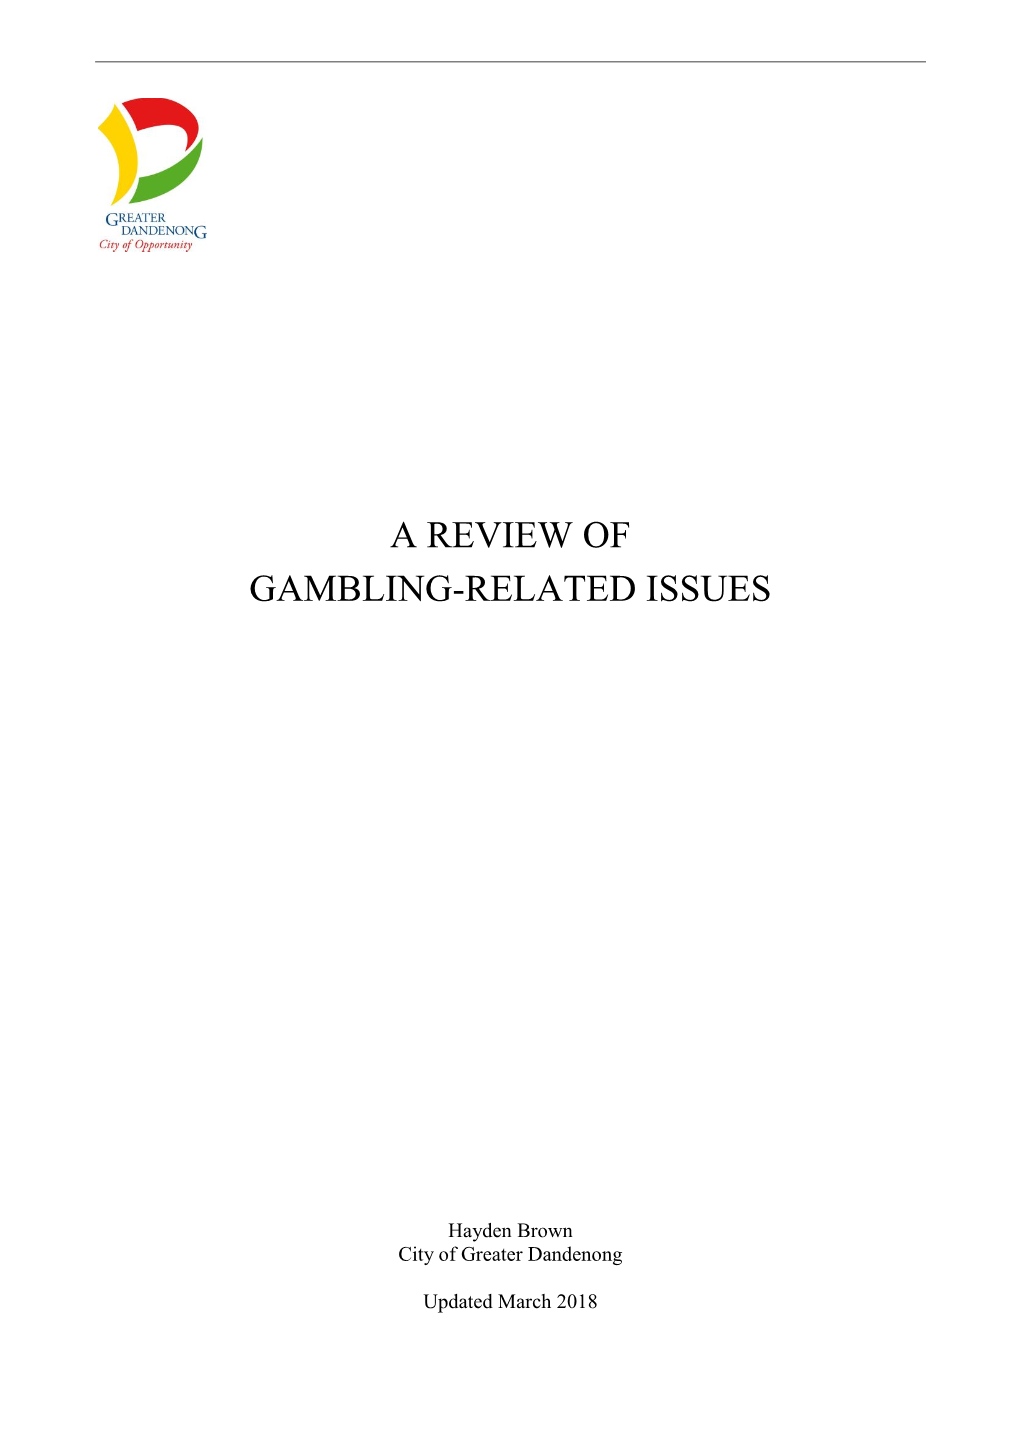 Notes About Gambling Issues